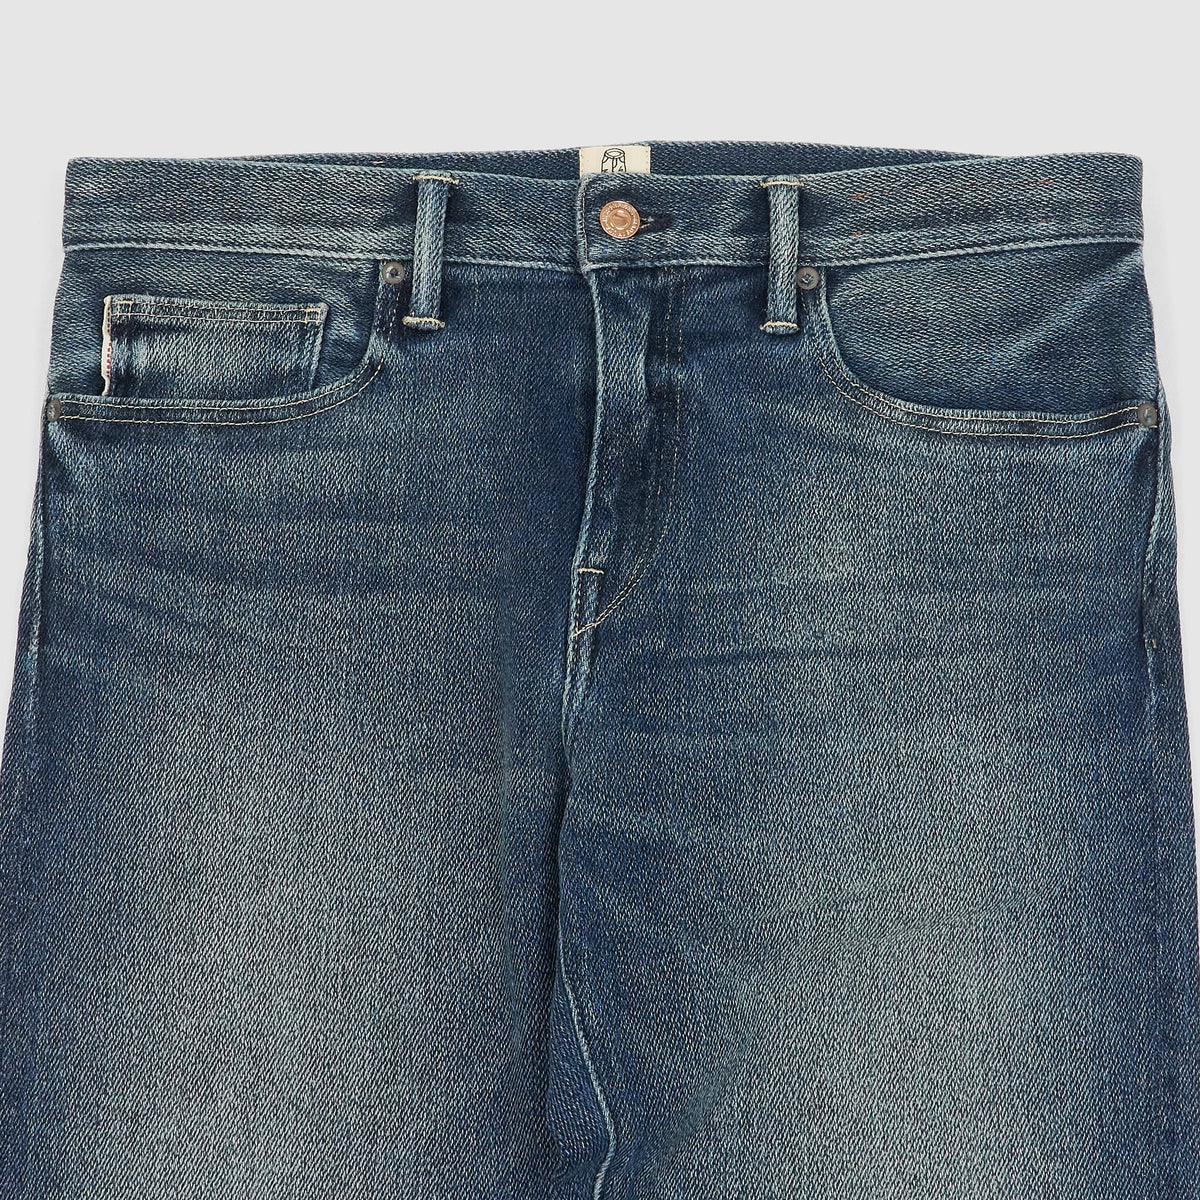 Hiroshi Kato The Pen Zip Fly 11.5 OZ Air Selvage Classic Fit